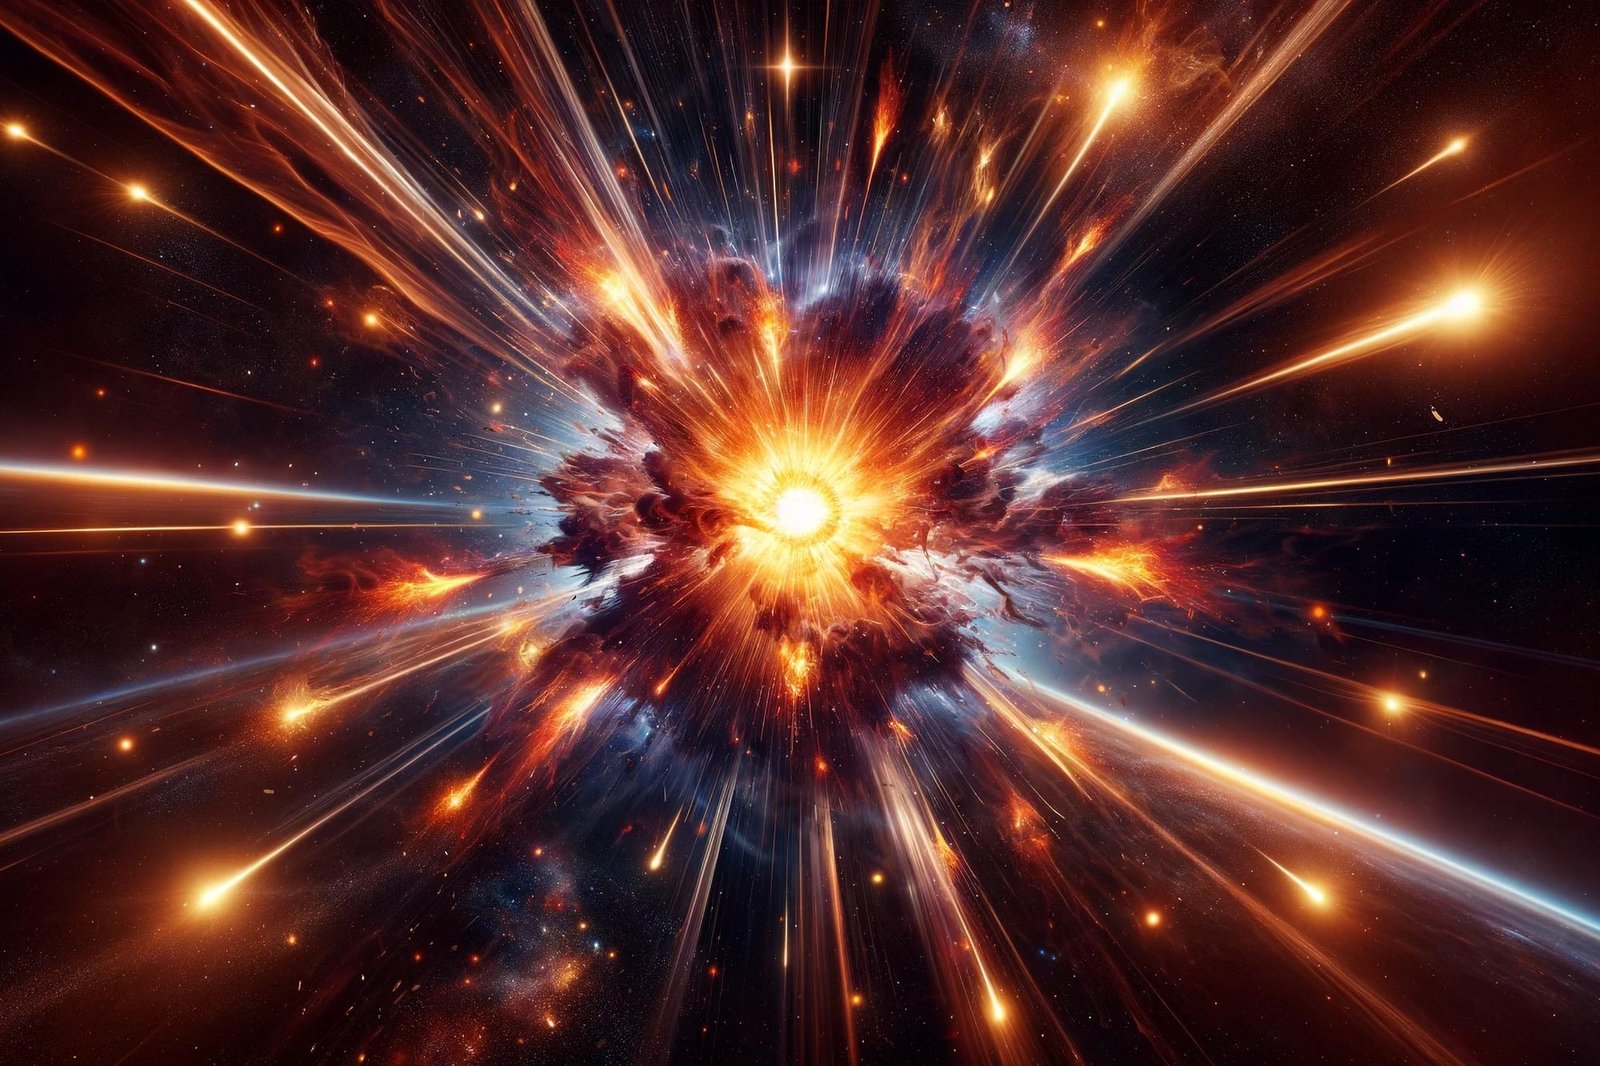 10x More Supernovae in Early Universe